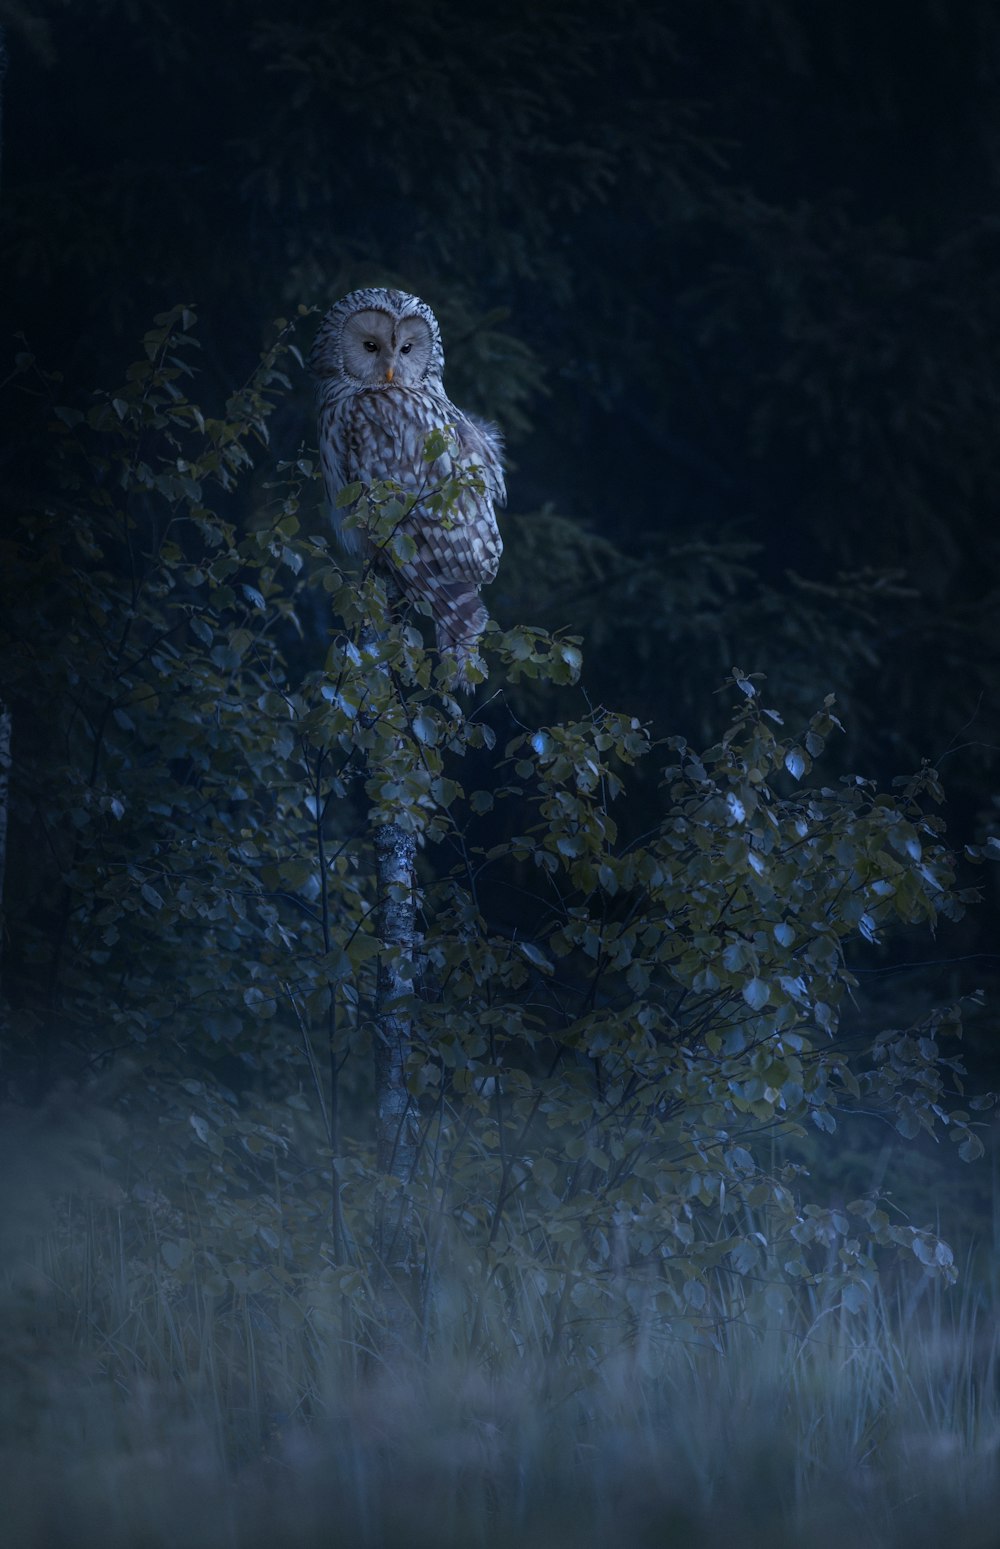 an owl sitting on a tree branch in the dark